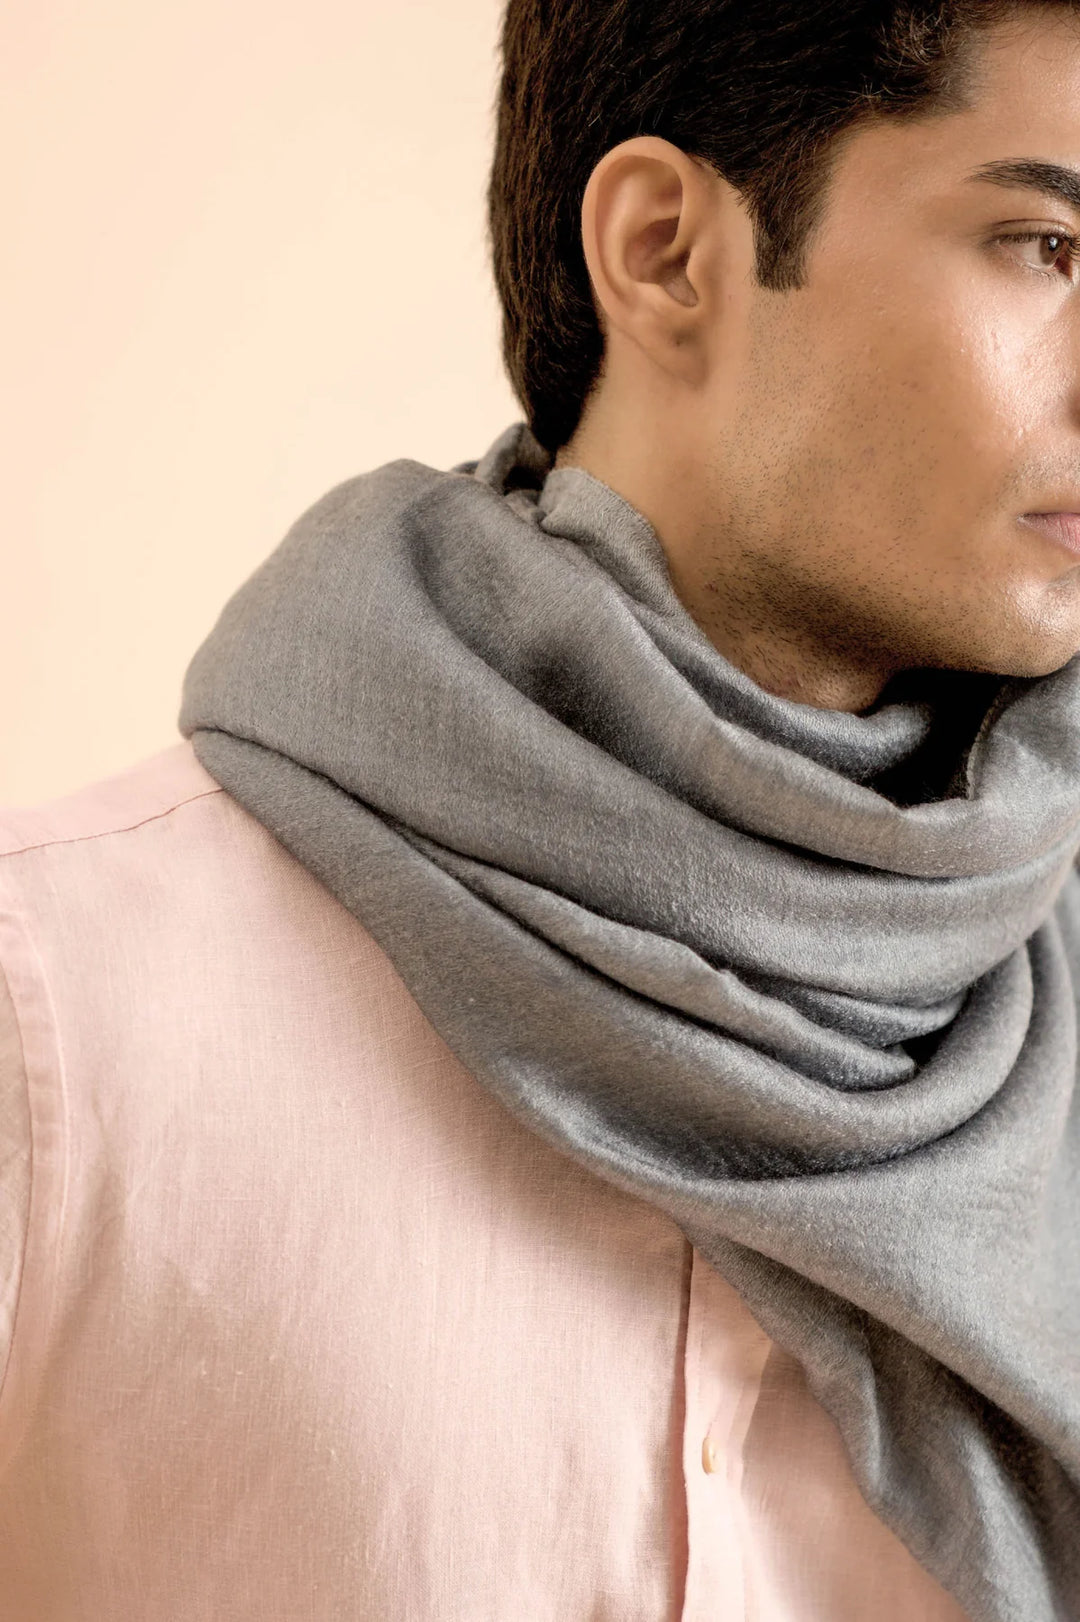 Soft Cashmere Stole: Elegant and Timeless | Zeok Handwoven Soft Cashmere Stole - Gray & Purple